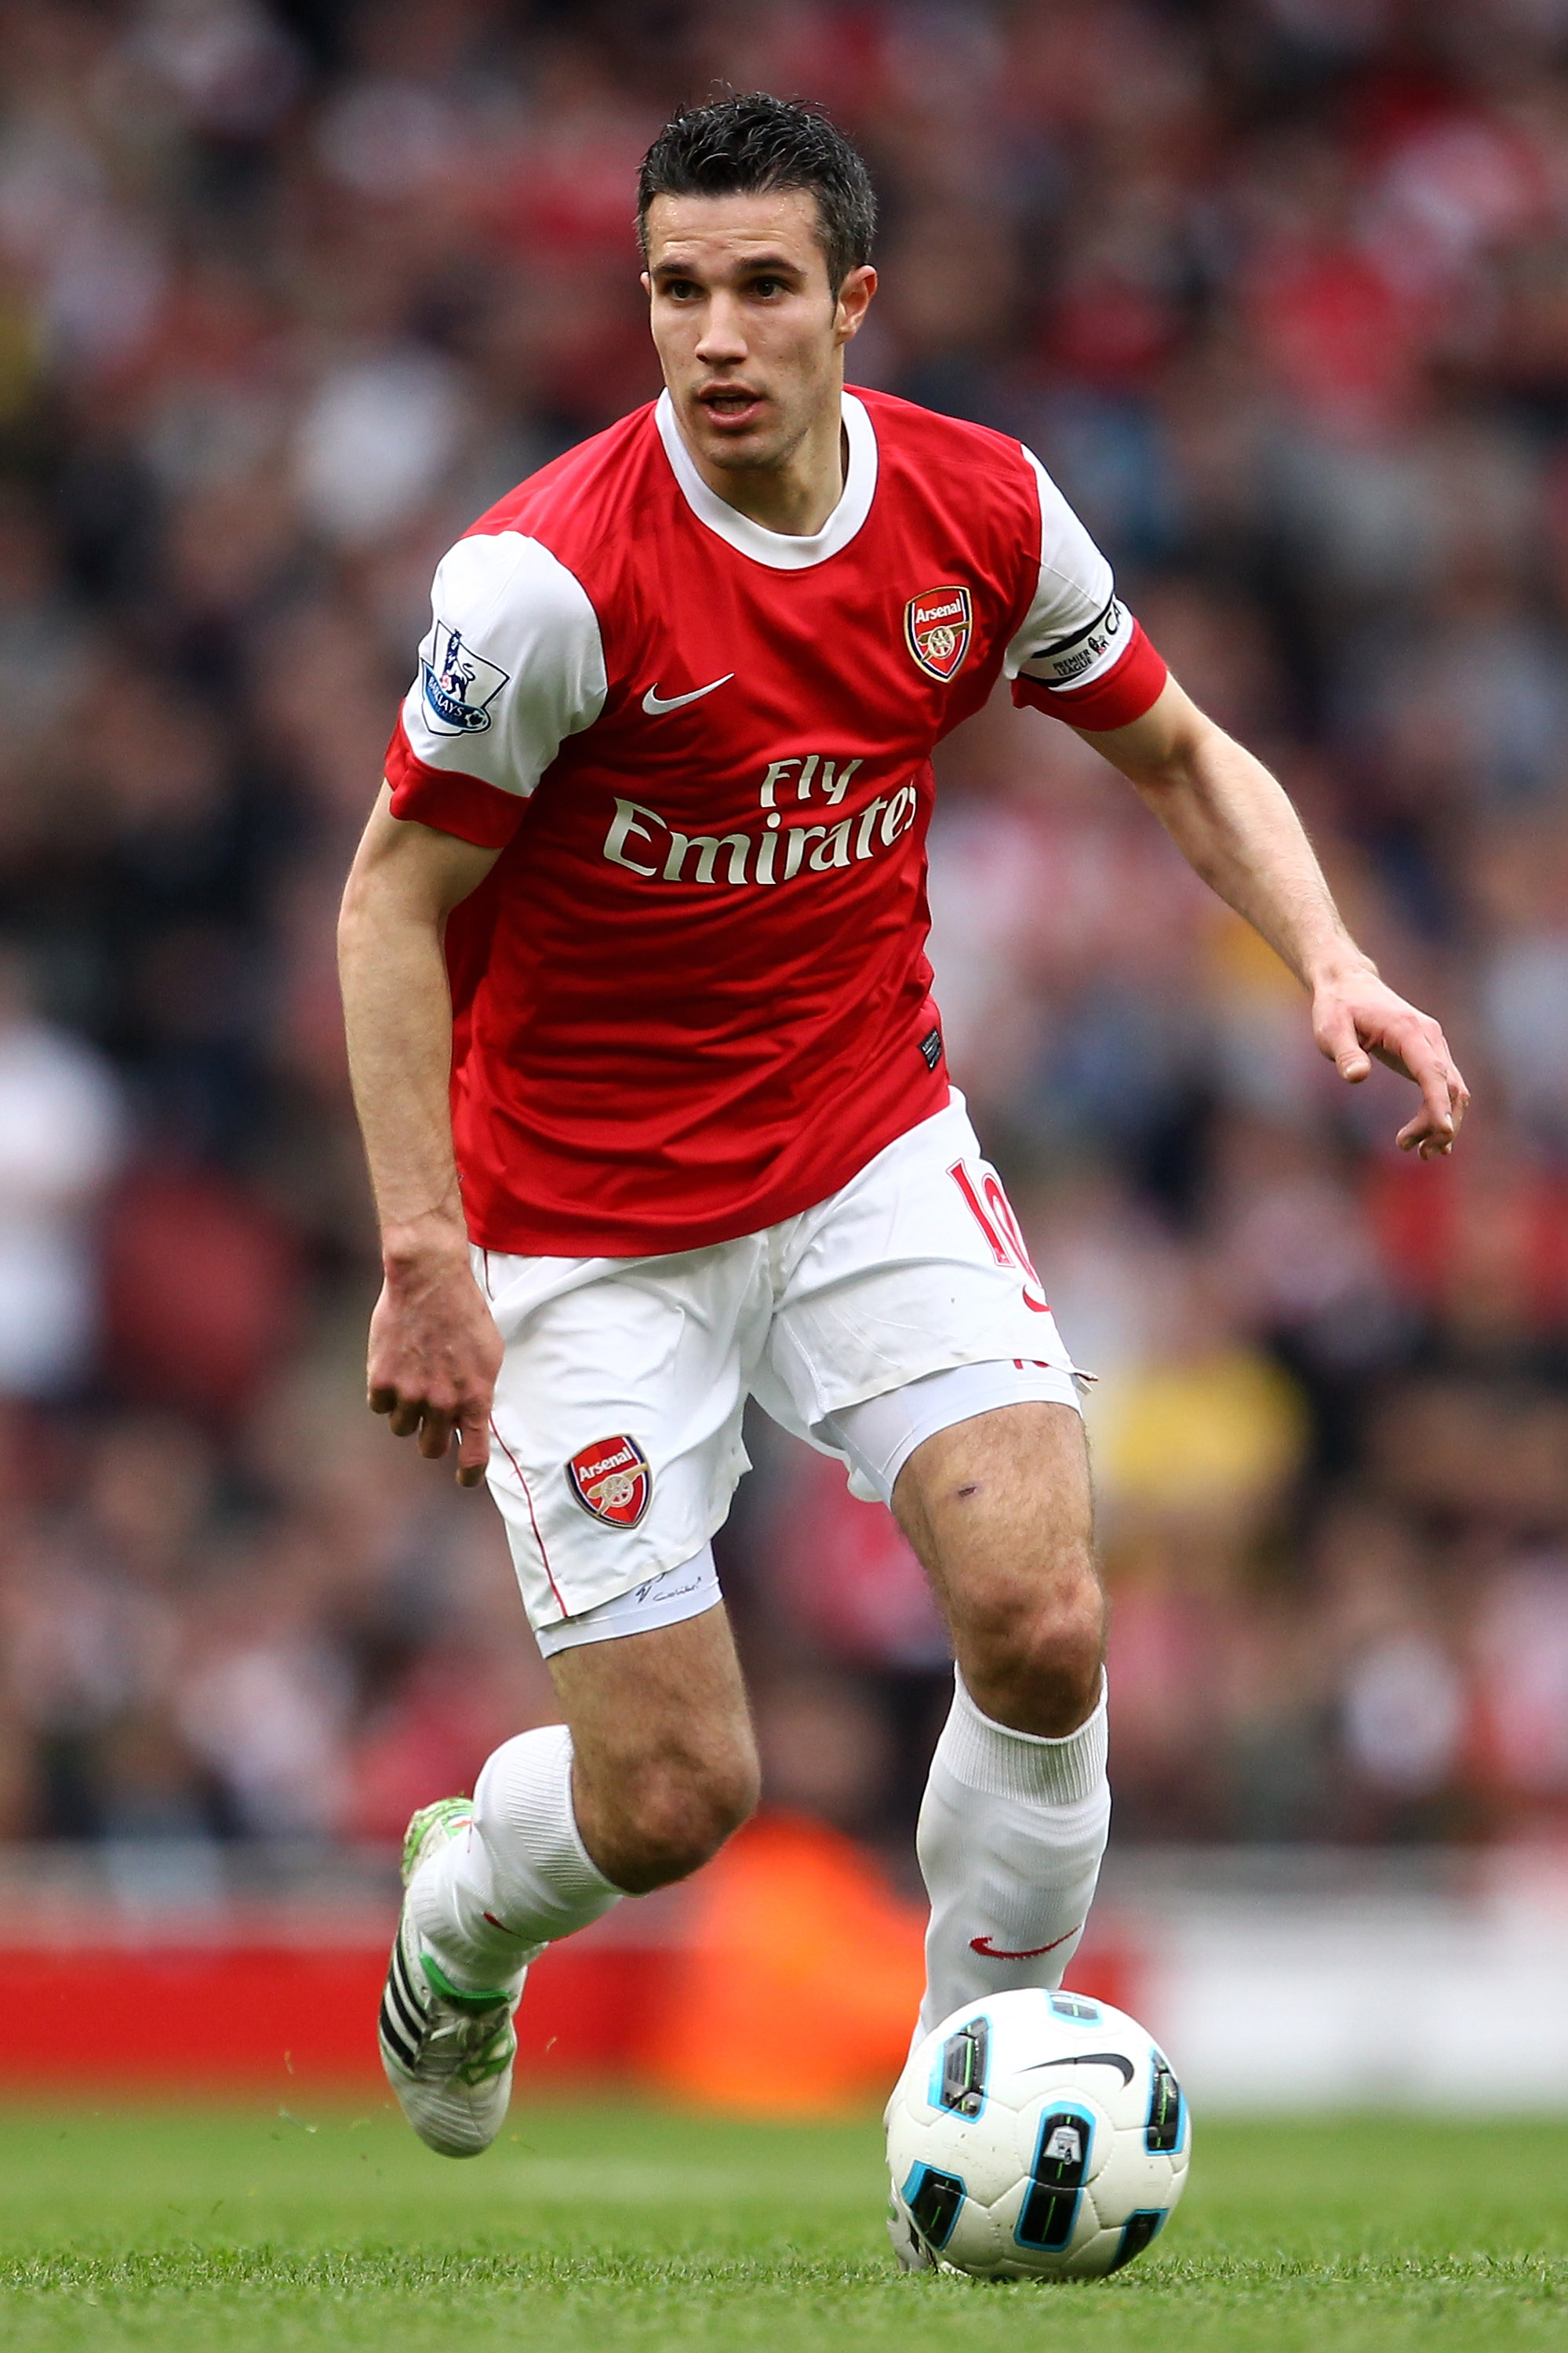 LONDON, ENGLAND - APRIL 02:  Robin van Persie of Arsenal runs with the ball during the Barclays Premier League match between Arsenal and Blackburn Rovers at the Emirates Stadium on April 2, 2011 in London, England.  (Photo by Julian Finney/Getty Images)